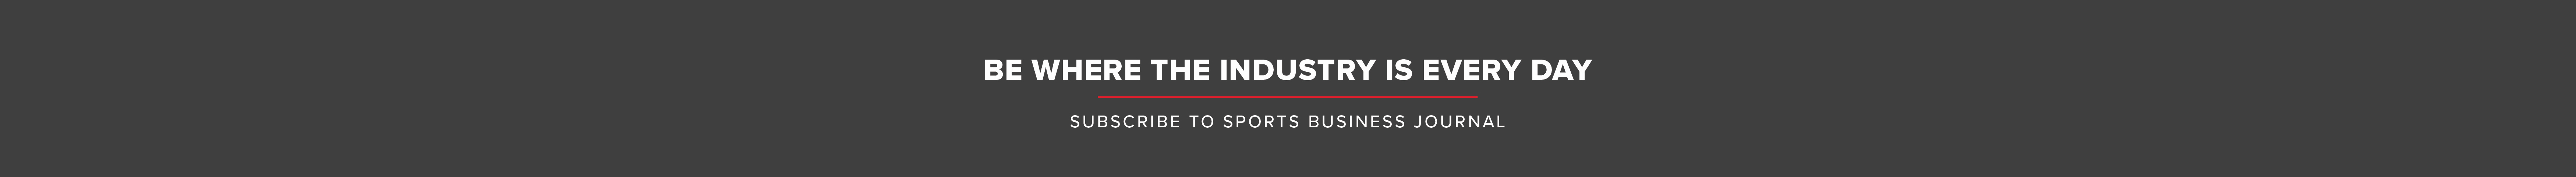 Be where the industry is every day, Subscribe to SBJ